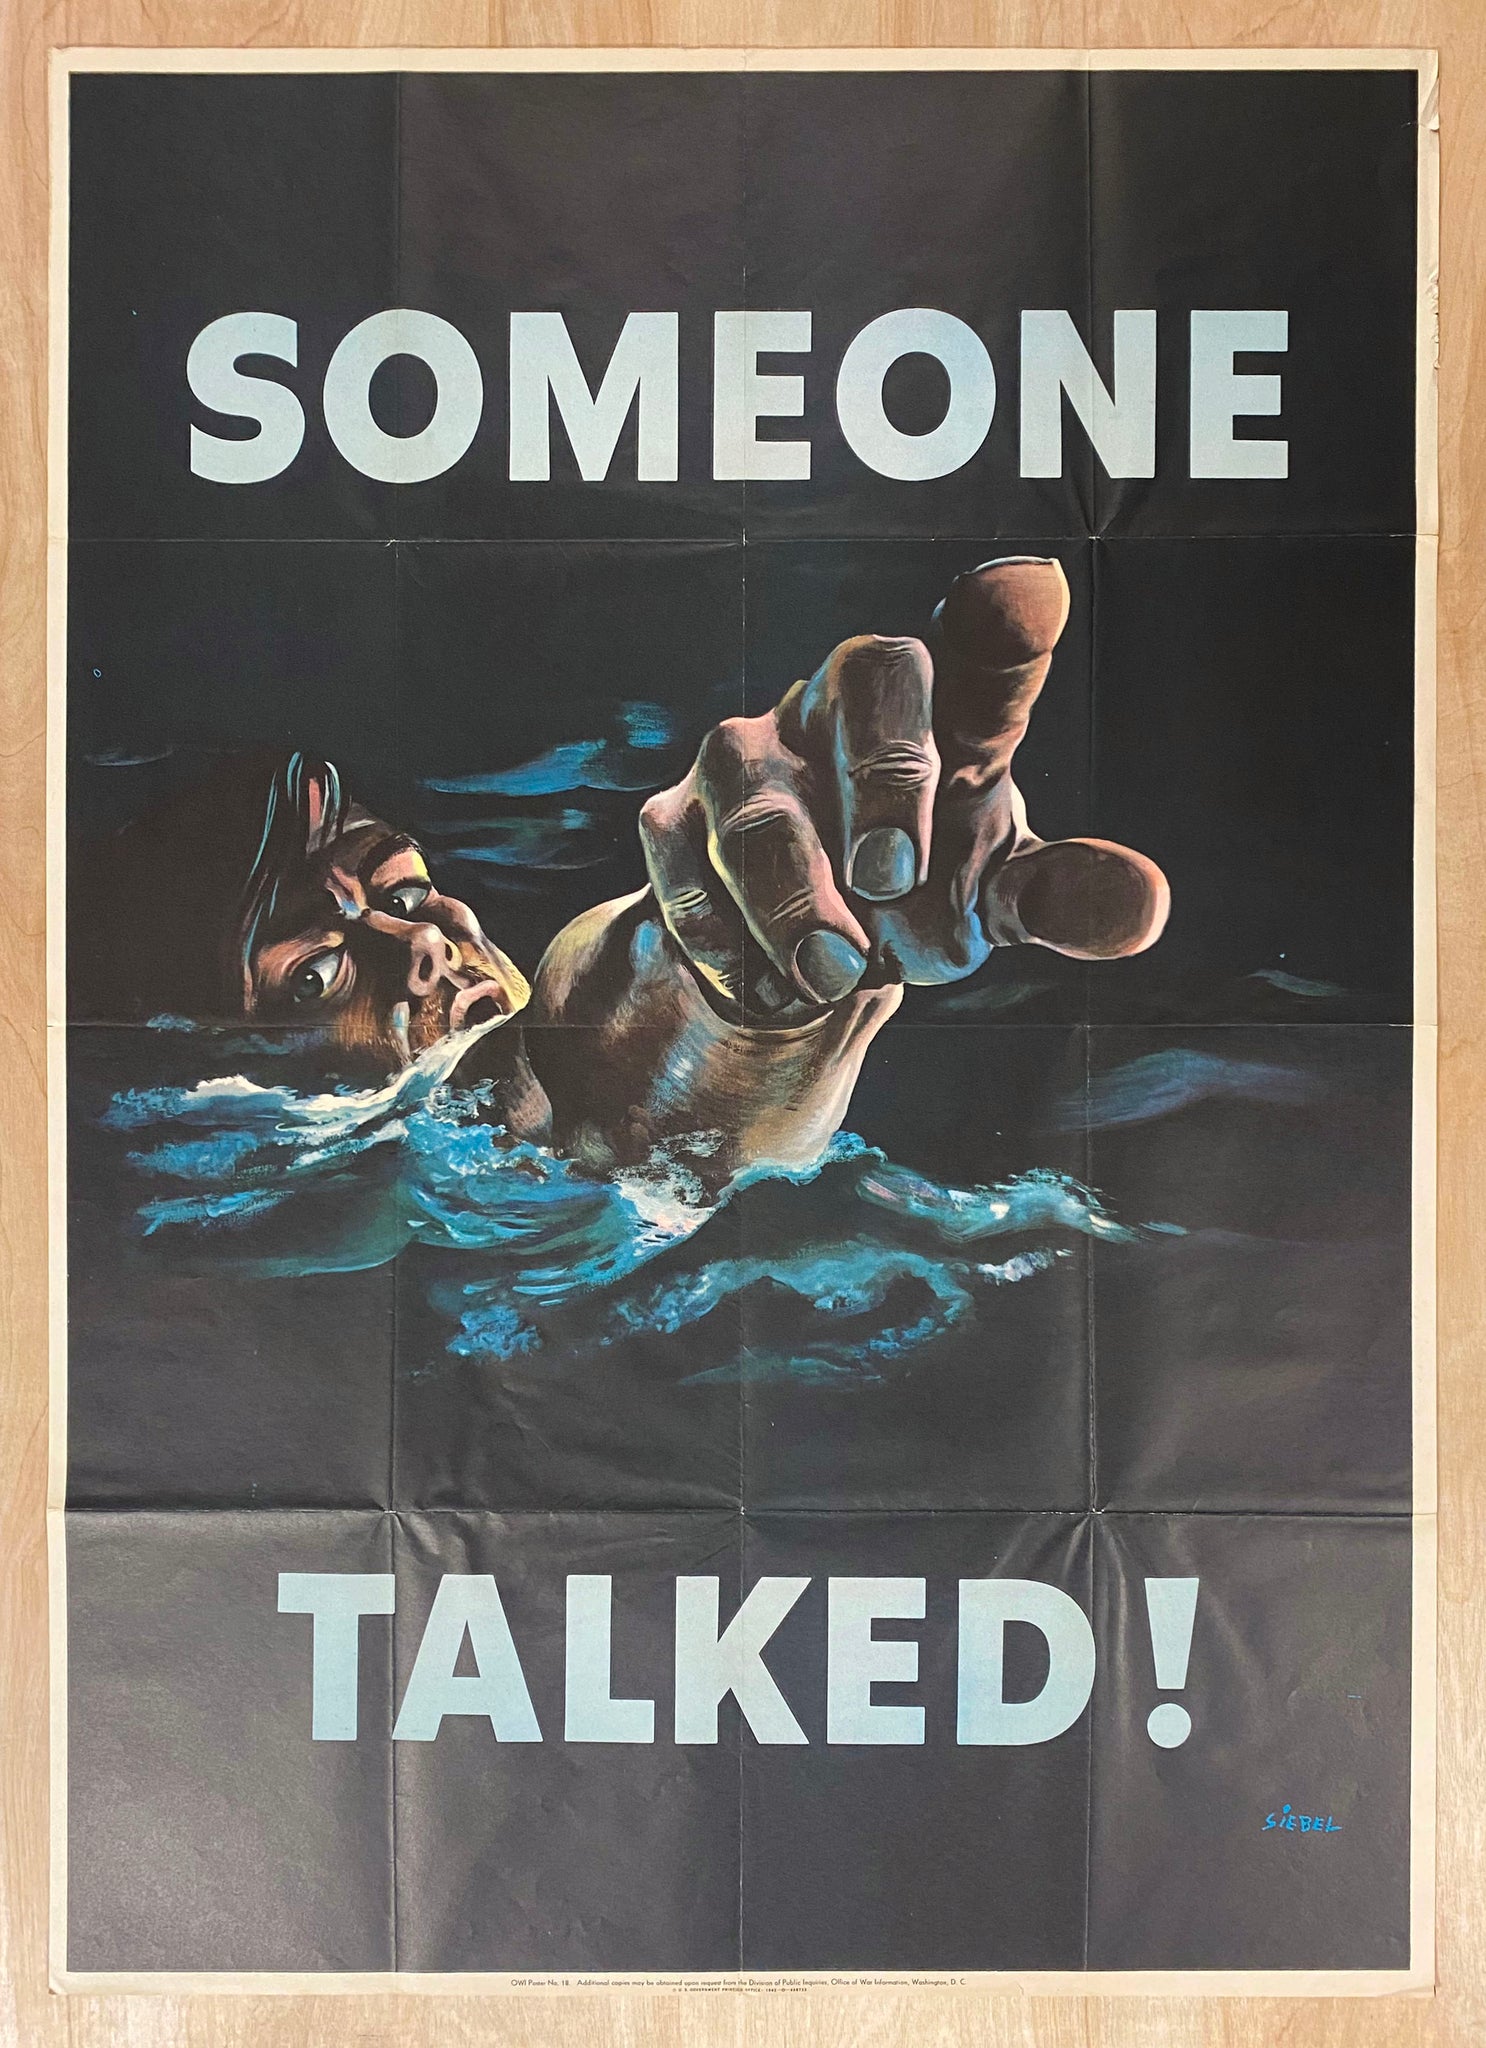 1942 Someone Talked! by Frederick Siebel Loose Lips Sink Ships WWII